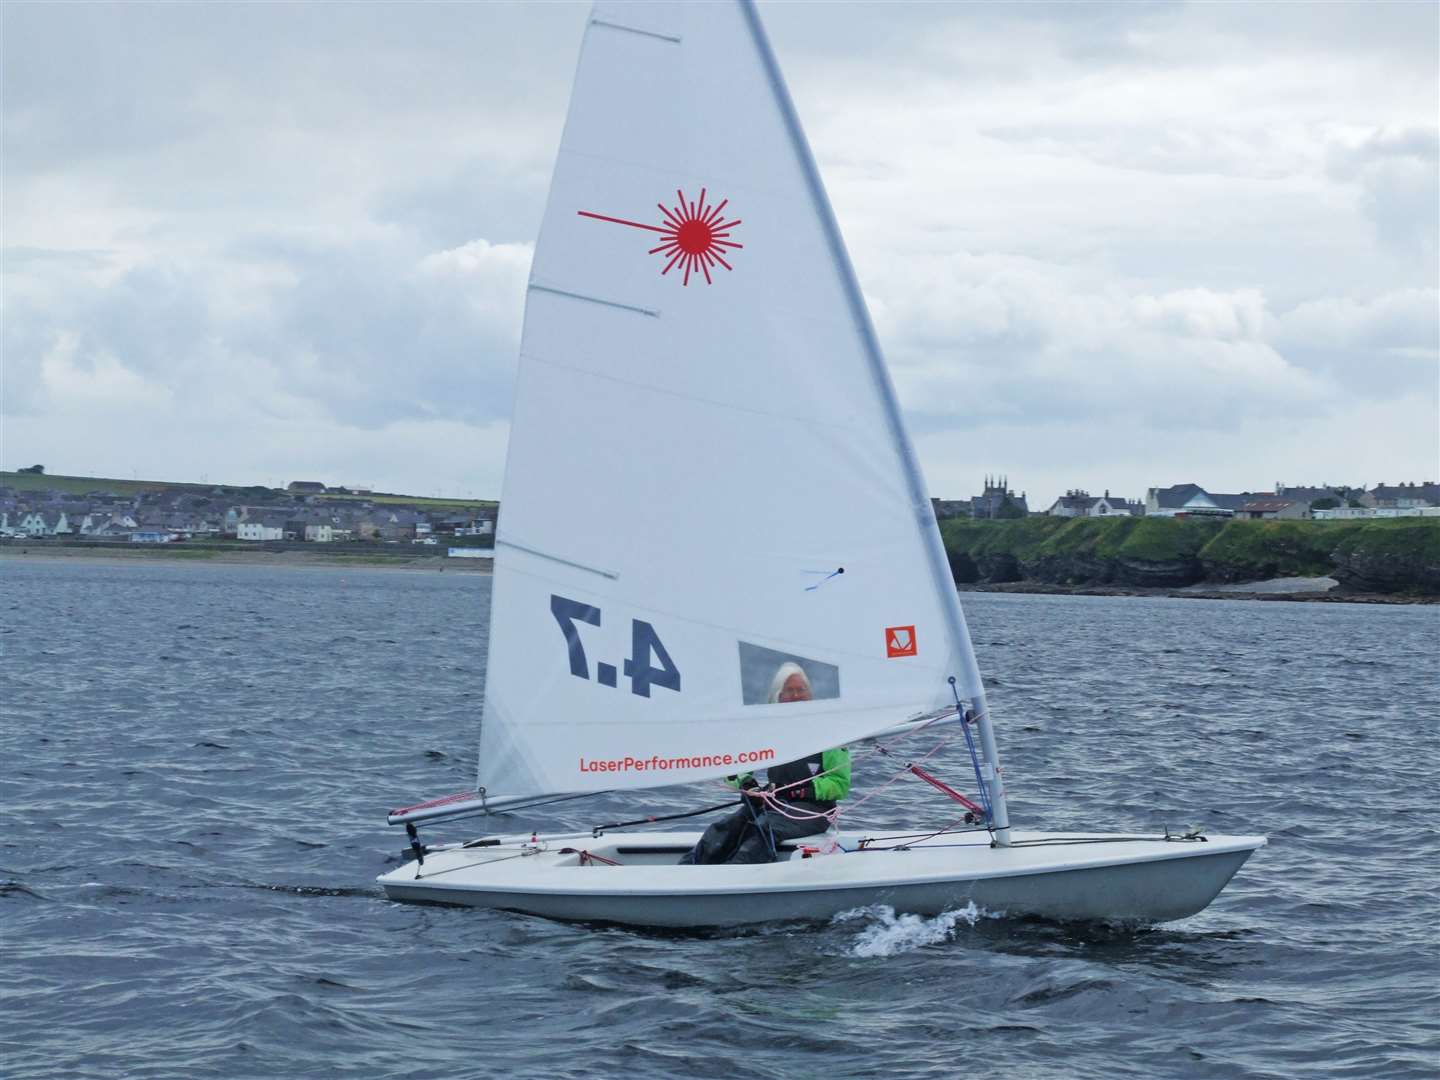 Marjory Lord in her Laser enjoying the conditions in Thurso Bay at the weekend.